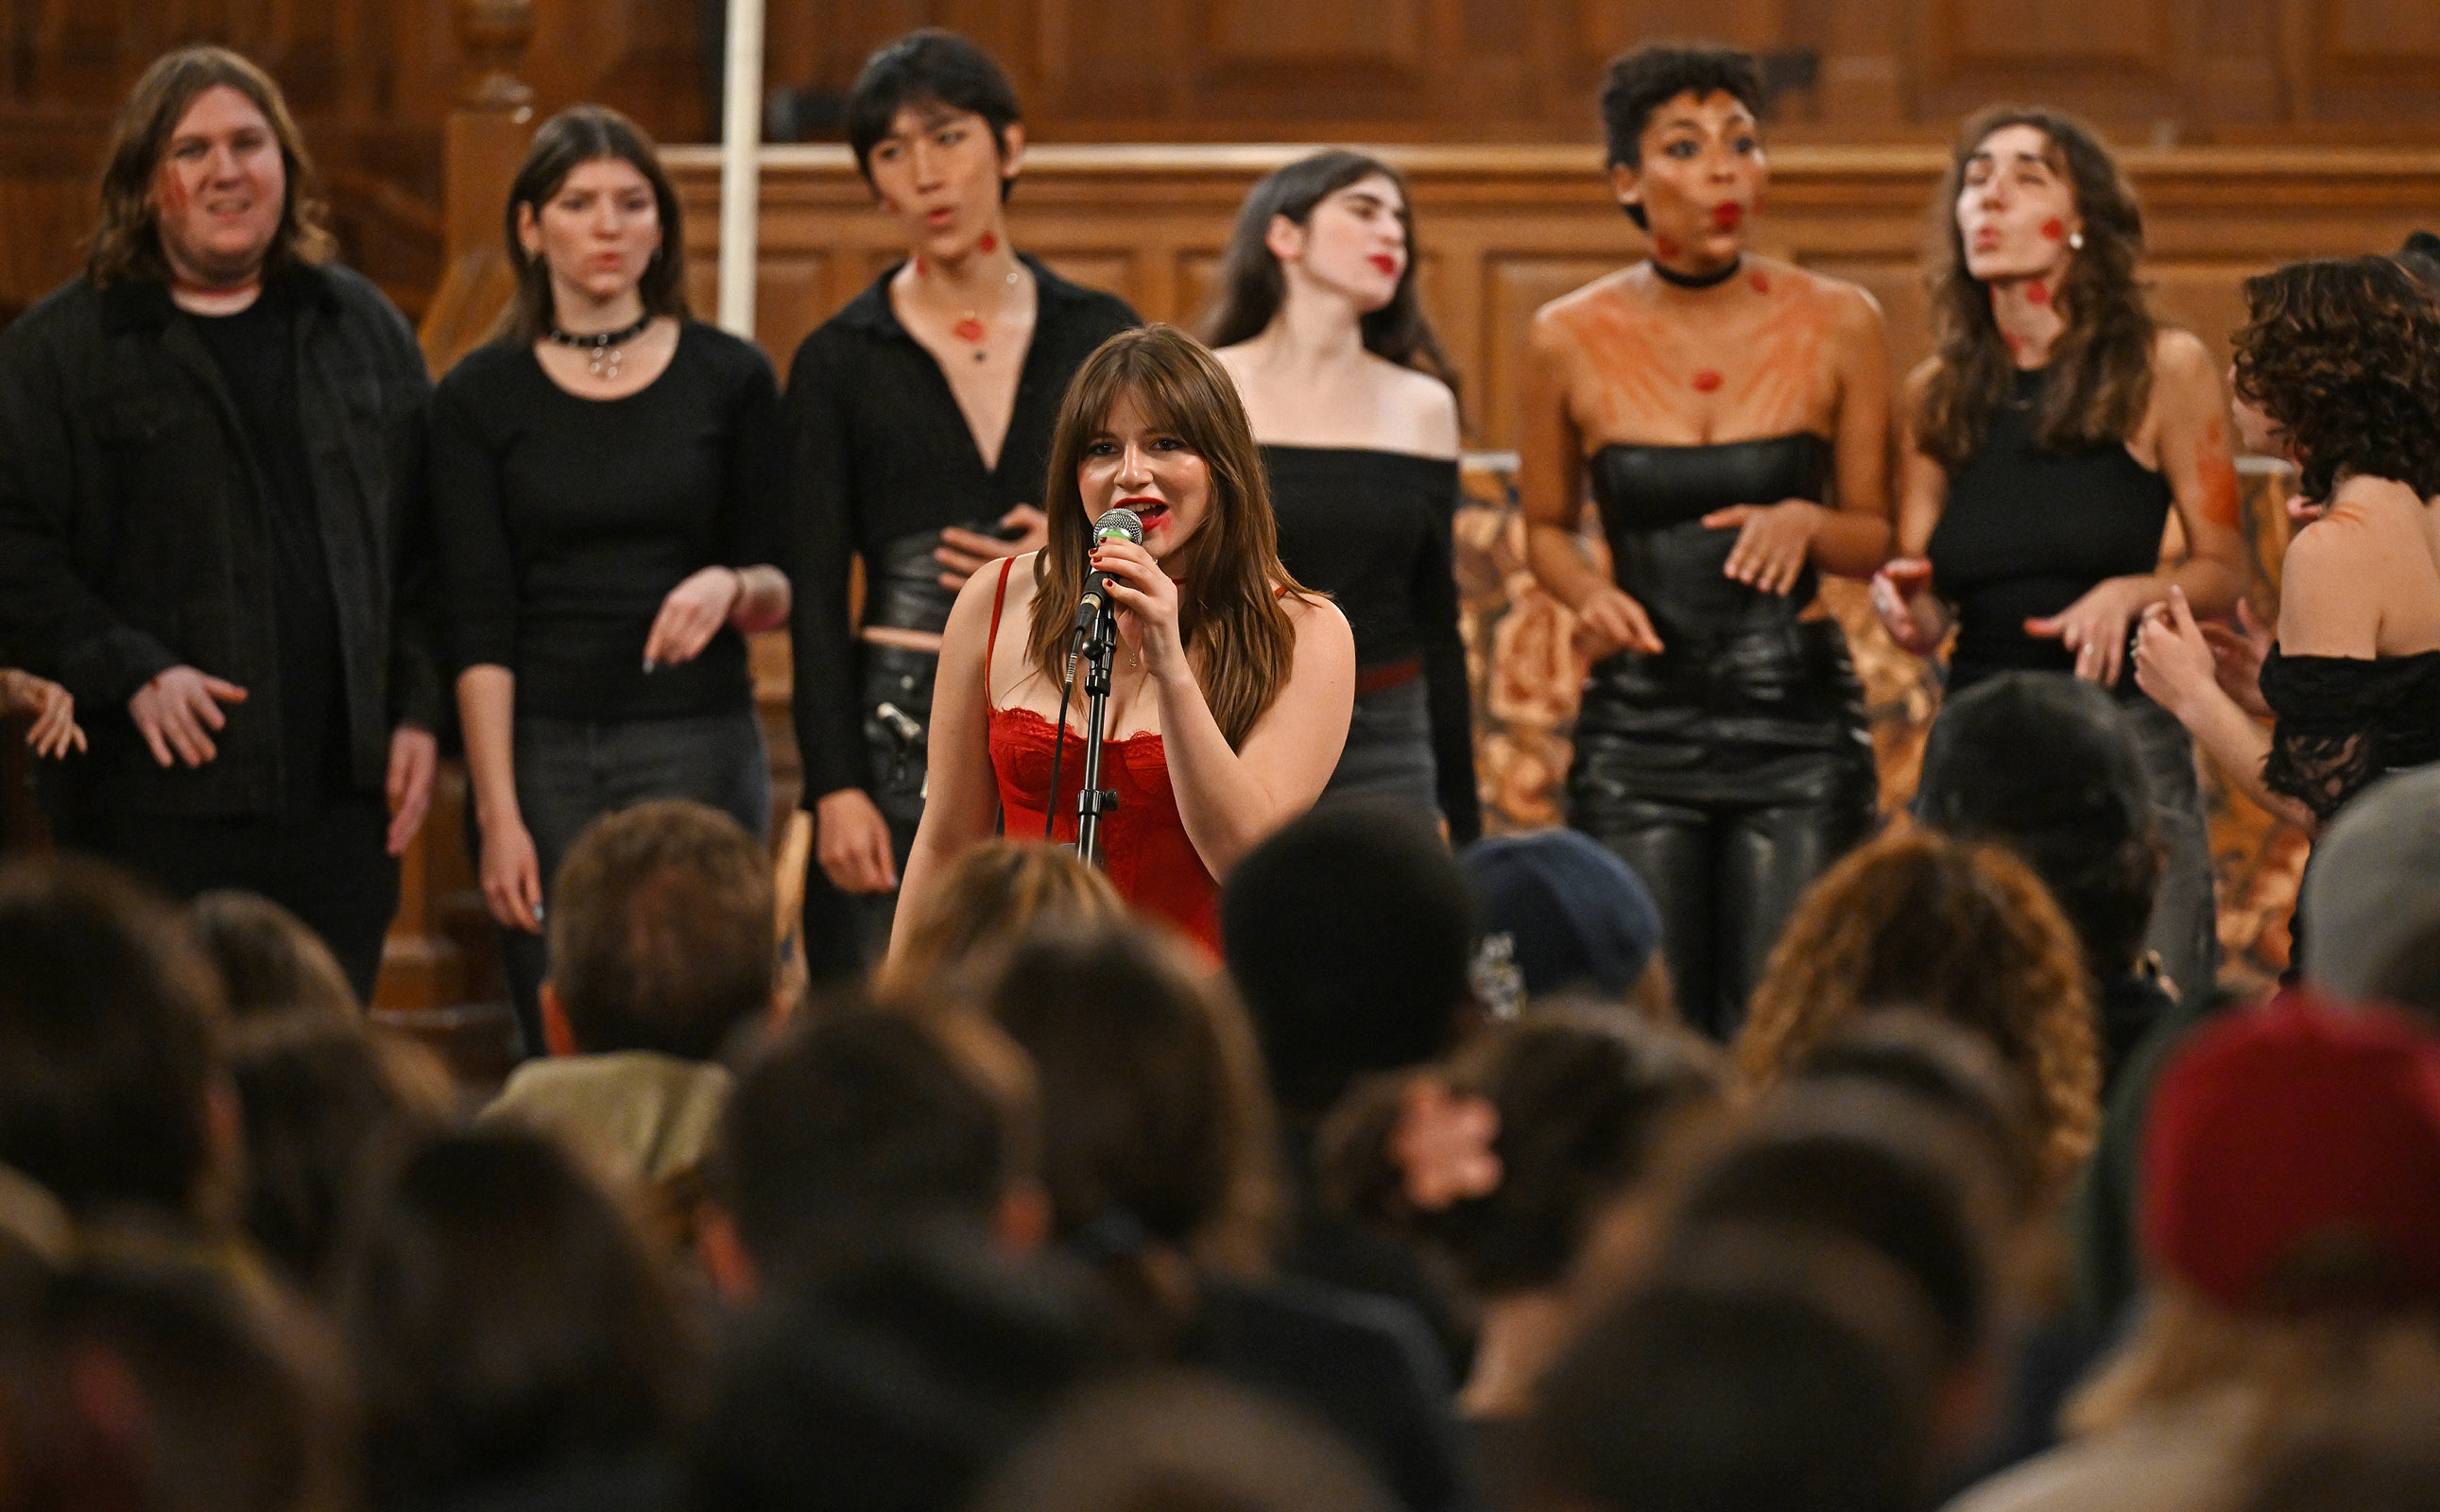 Connecticut College’s seven a cappella groups; Co Co Beaux, Schwiffs, ConnArtists, ConnChords, Vox Cemeli, Willams Street Mix, and Miss Connduct each performed one sung each in a Halloween Battle of the Bands.